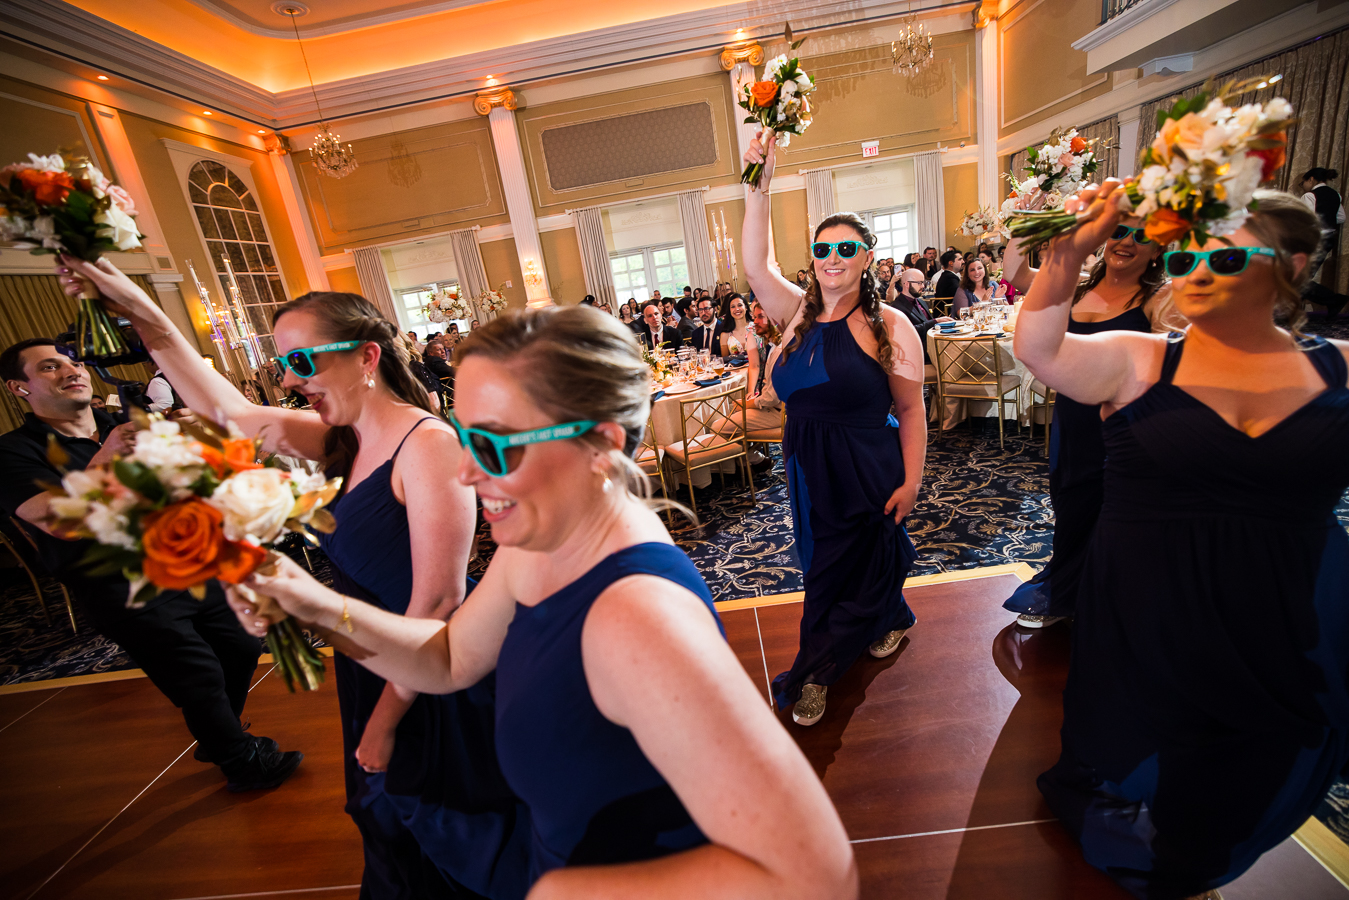 new jersey wedding photographer, lisa rhinehart, captures this unique perspective of the bridesmaids as they enter into the wedding reception together with their bouquets in the air and sunglasses down 